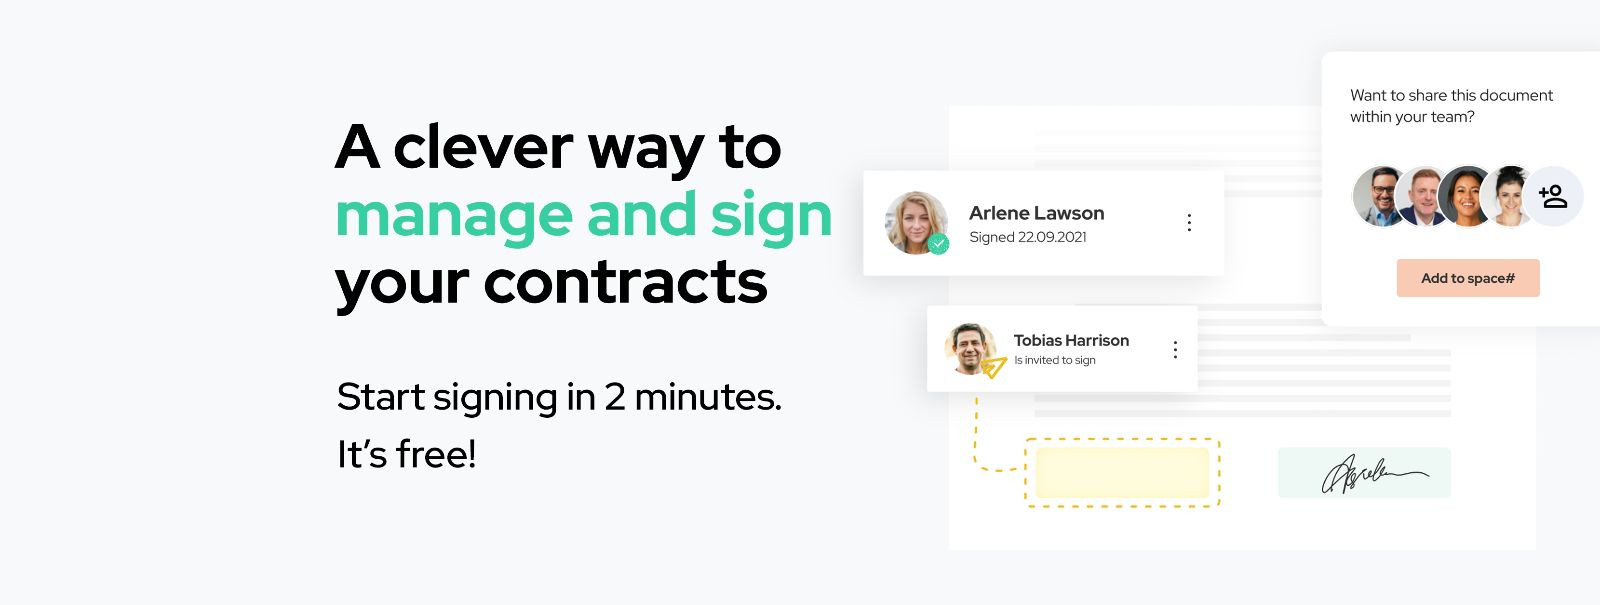 Digital signatures are the electronic equivalent of handwritten signatures, but they offer much more in terms of security and functionality. They are a key comp